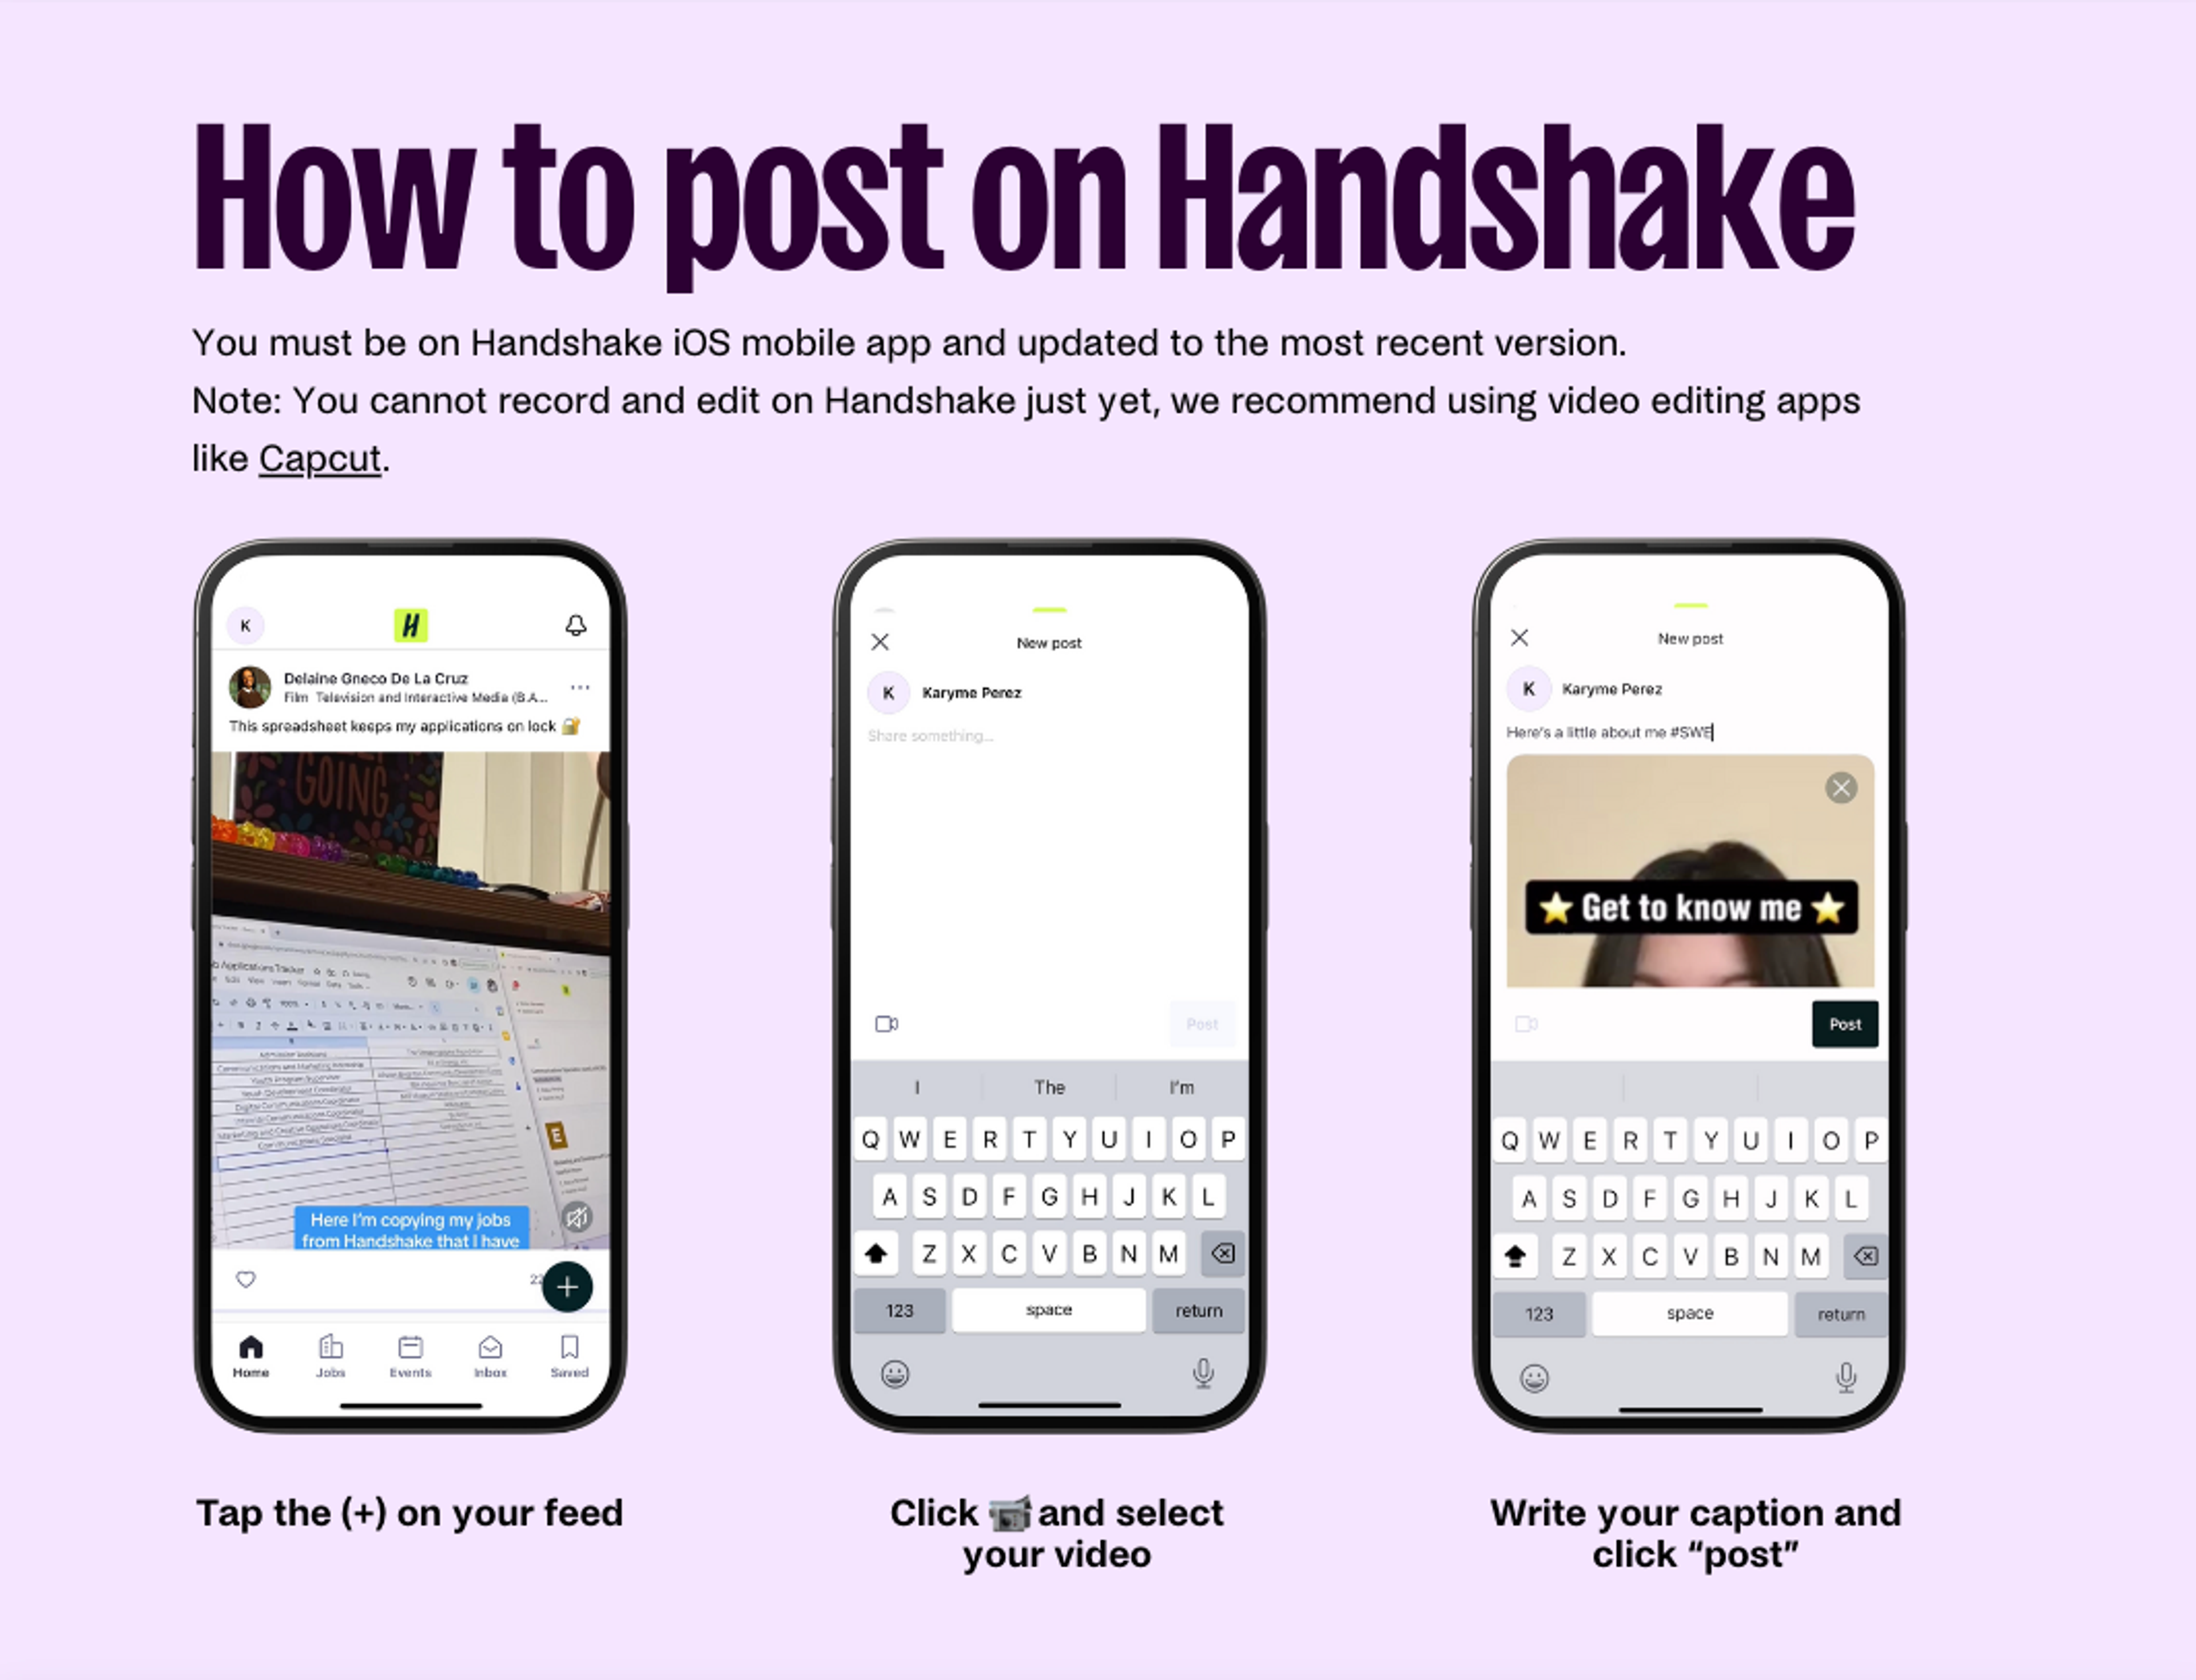 Handshake mobile app screenshots set against a lilac background show how to add, select, caption, and post content on the content feed 